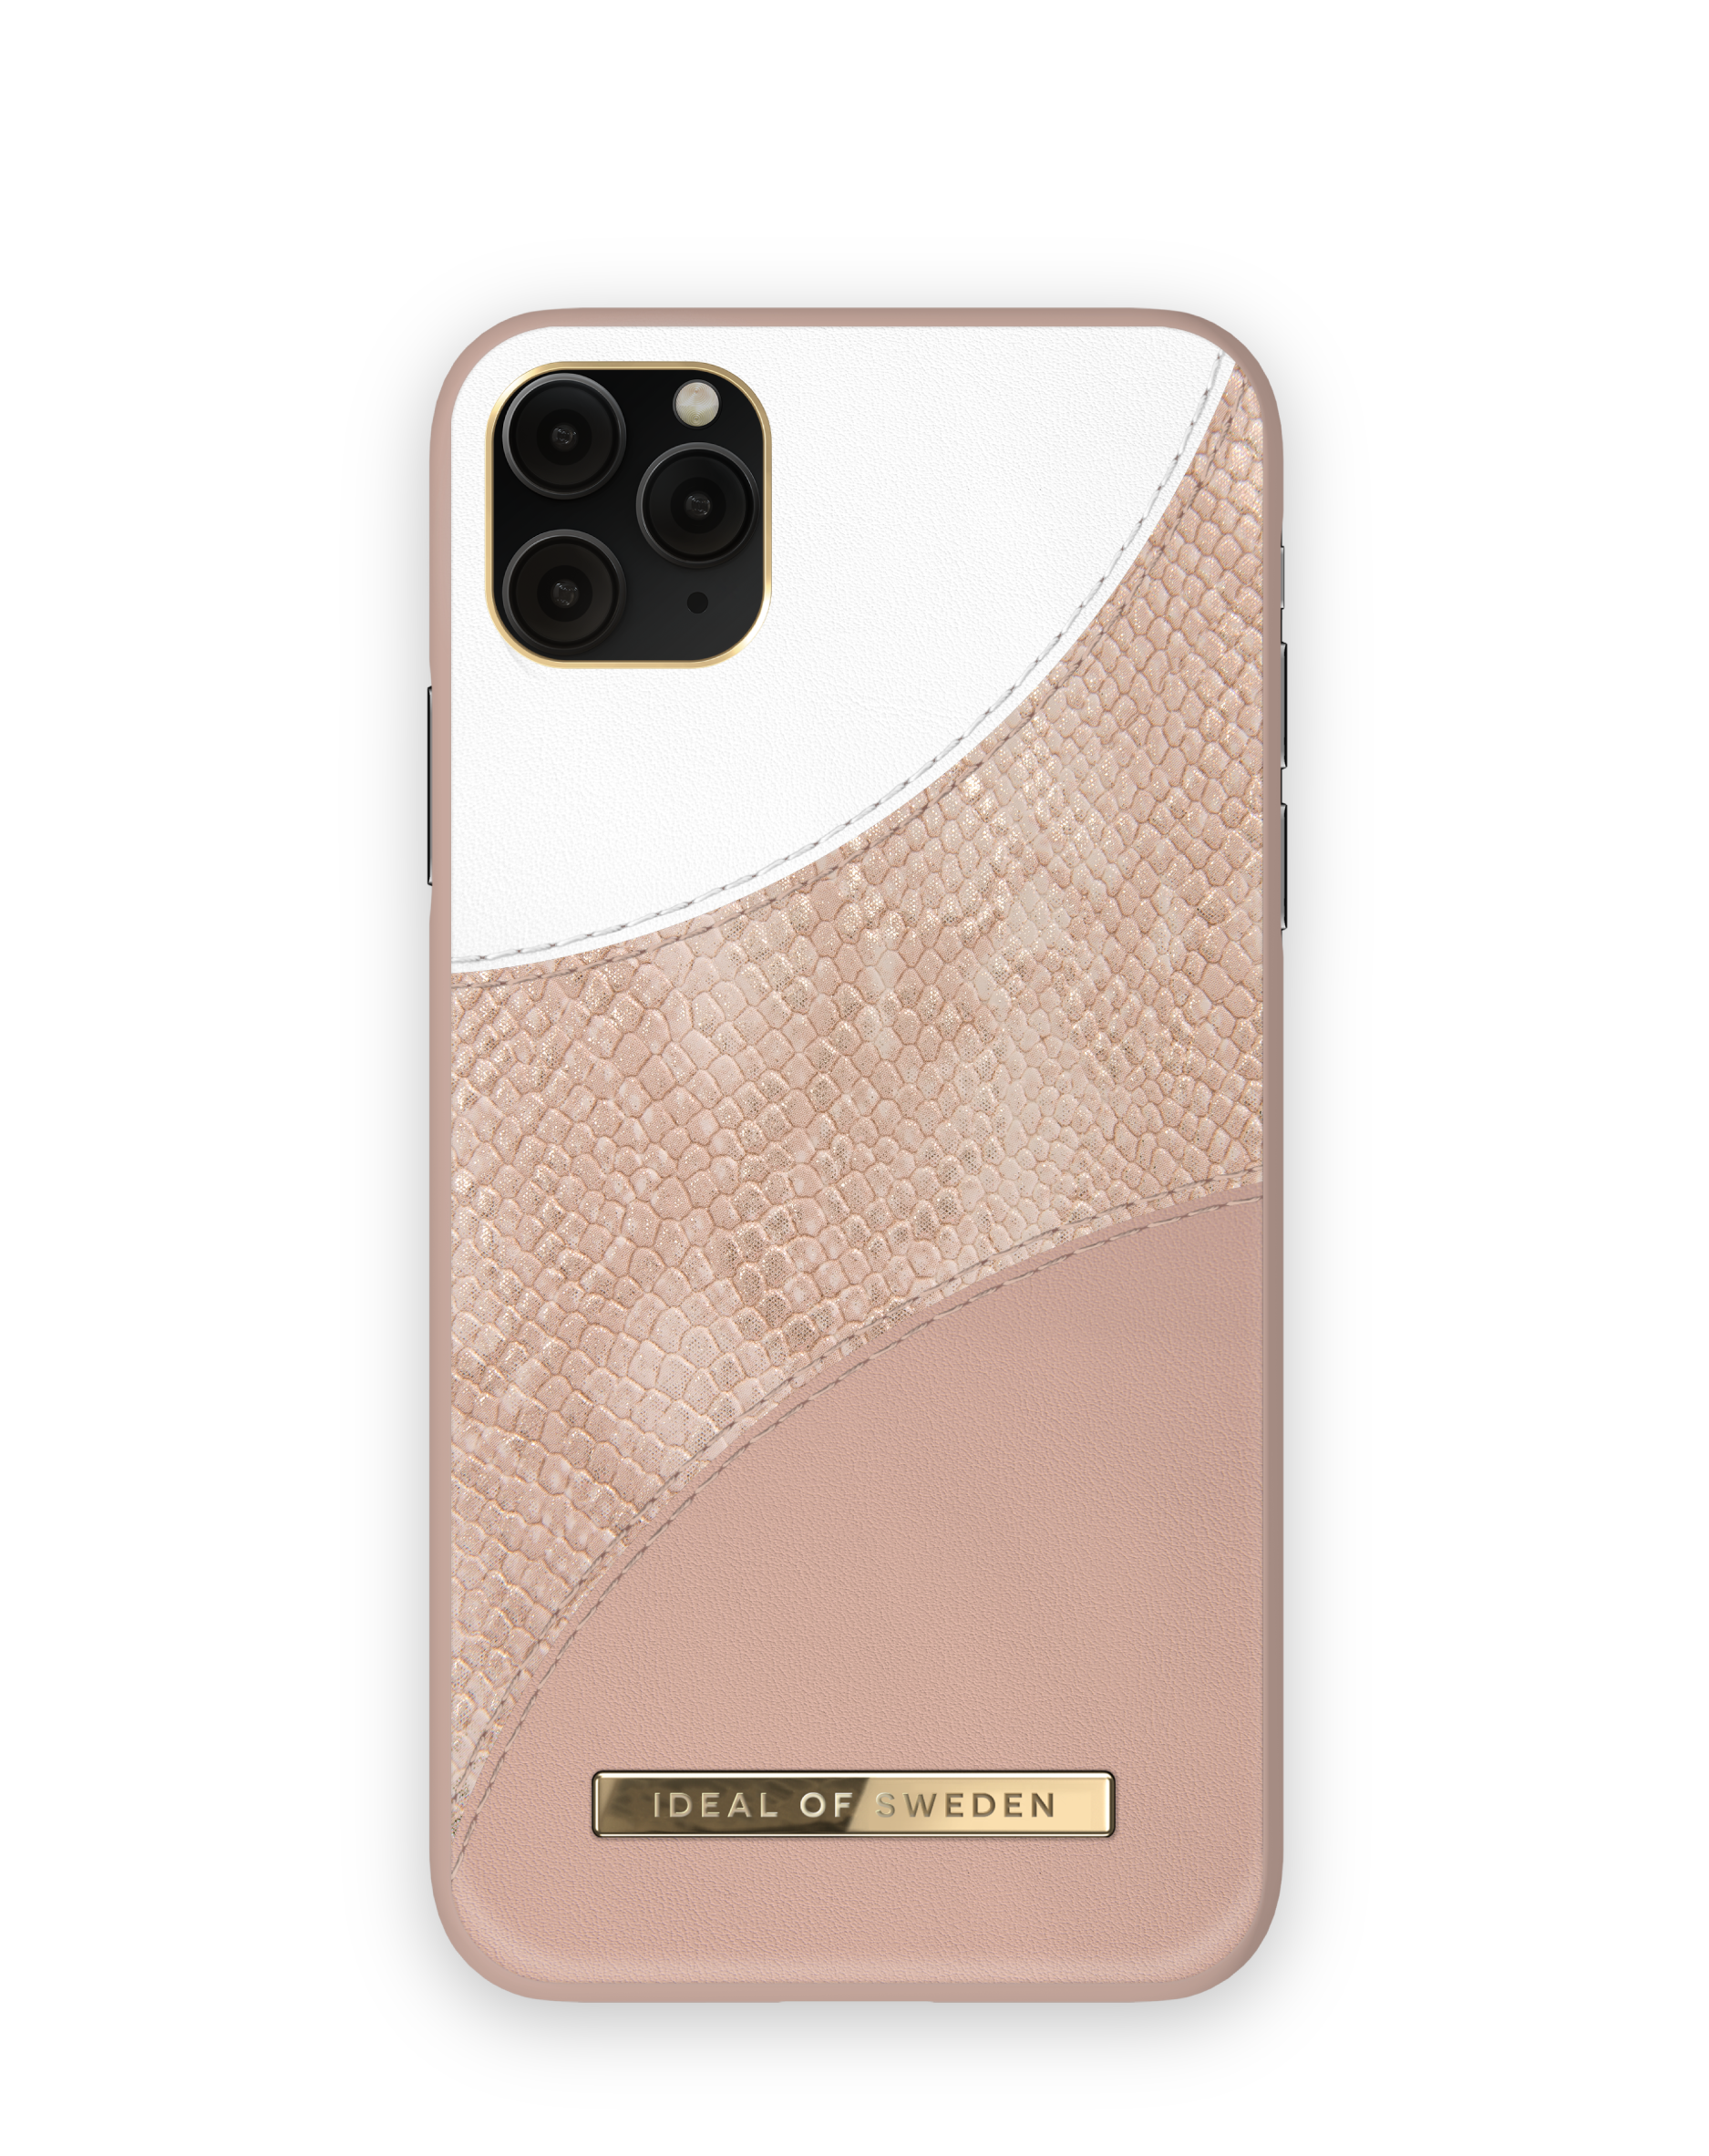 IDACSS21-I1965-269, Blush Max, iPhone IDEAL Apple OF 11 Apple Backcover, SWEDEN iPhone Snake XS Pro Max, Pink Apple,